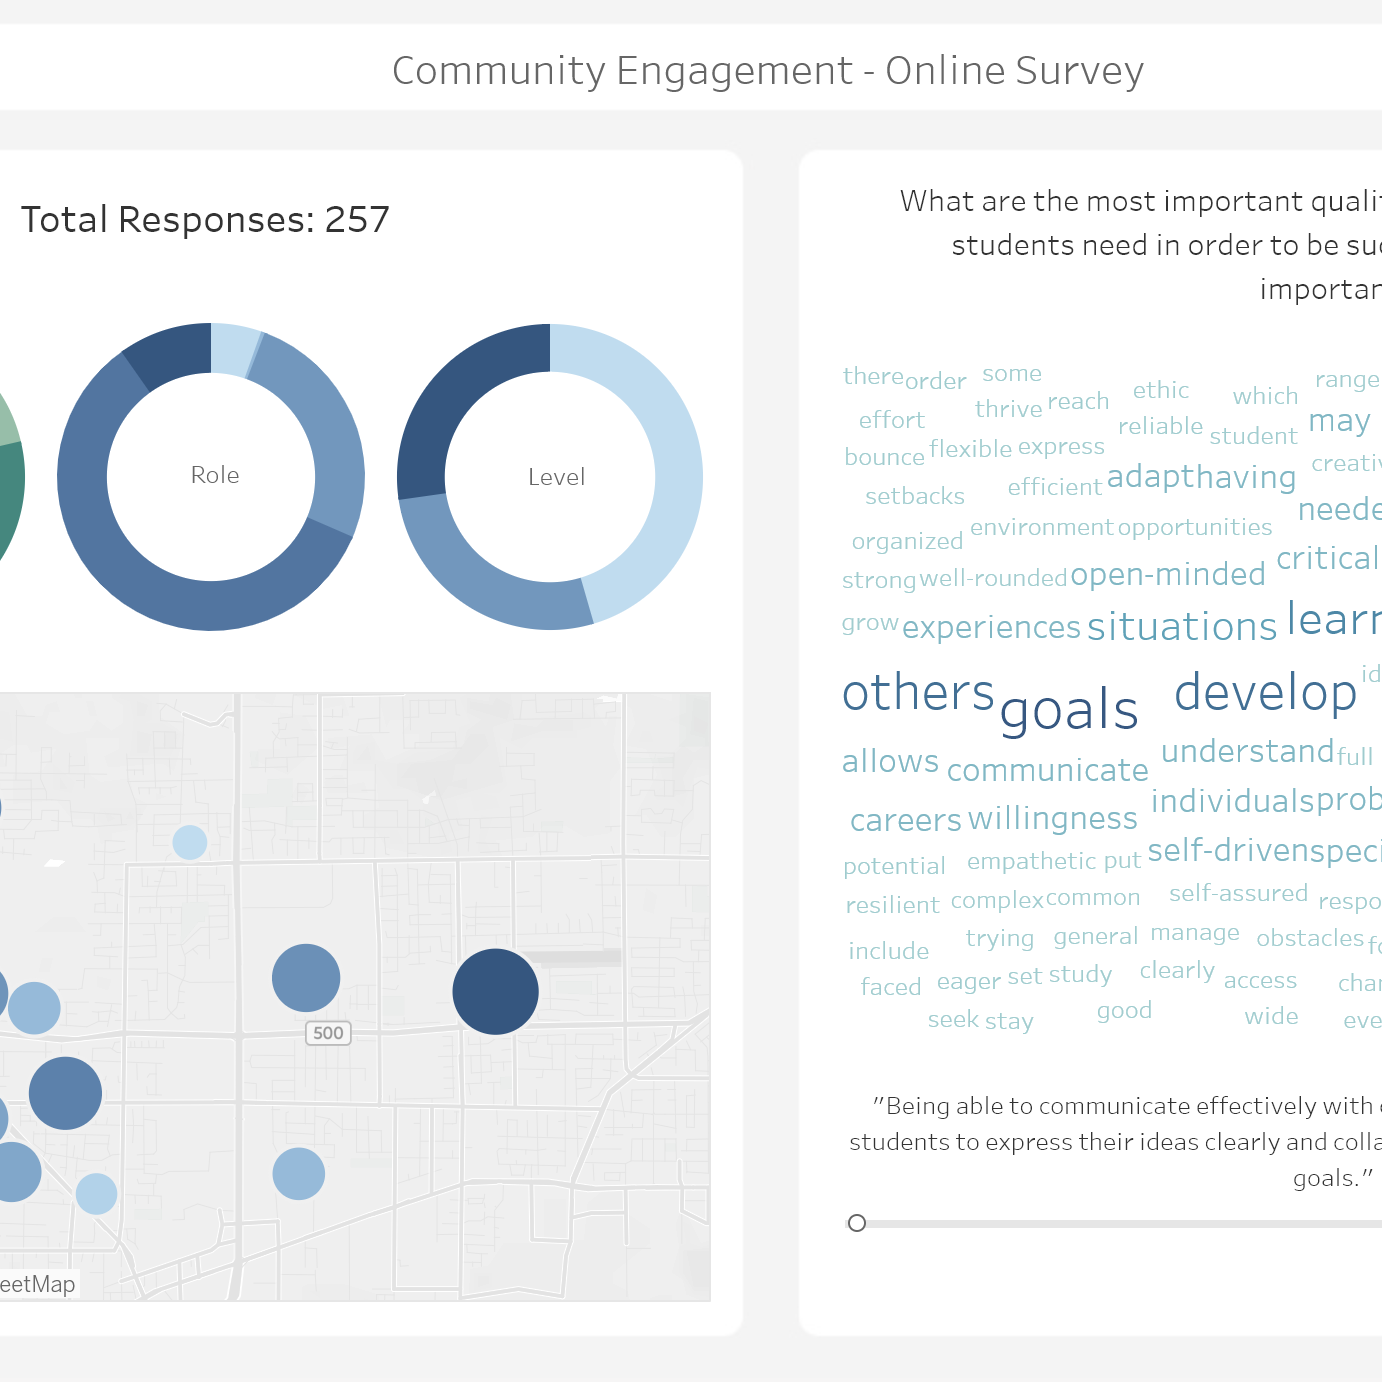 A thumbnail of a tableau dashboard showing community engagement survey results